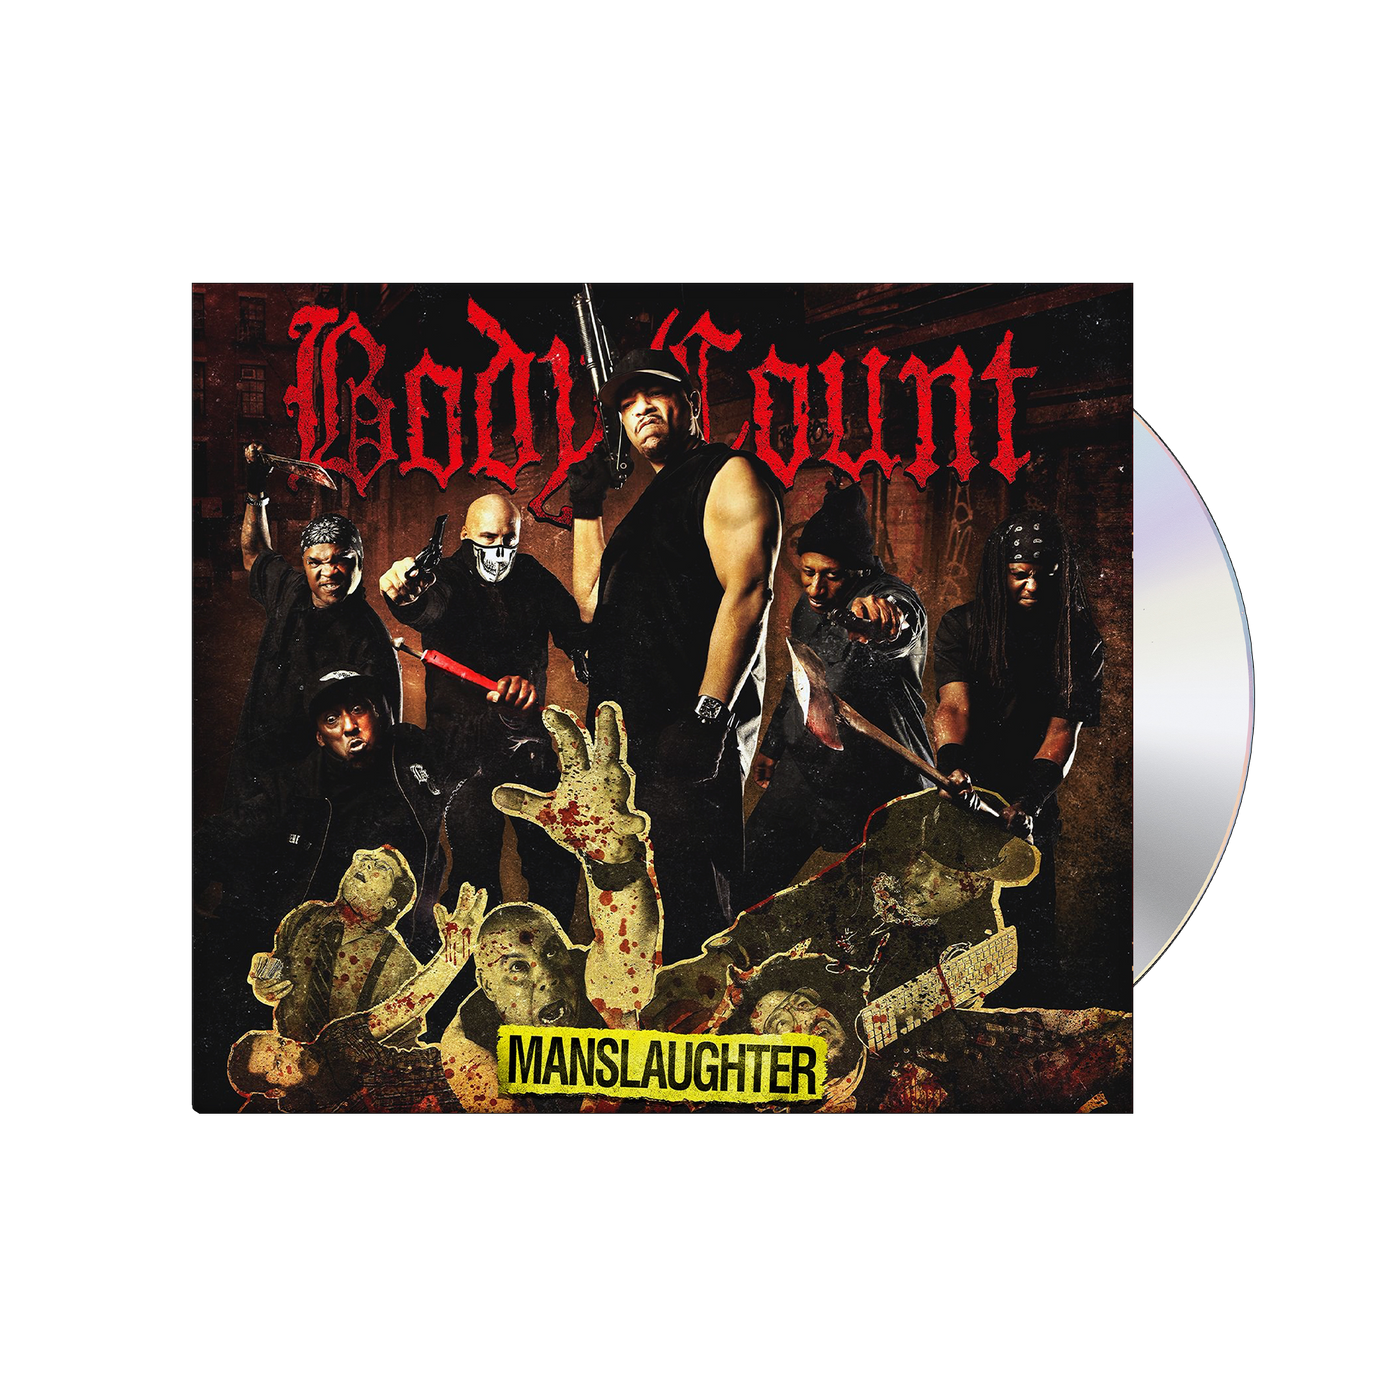 Body Count - 'Manslaughter' CD